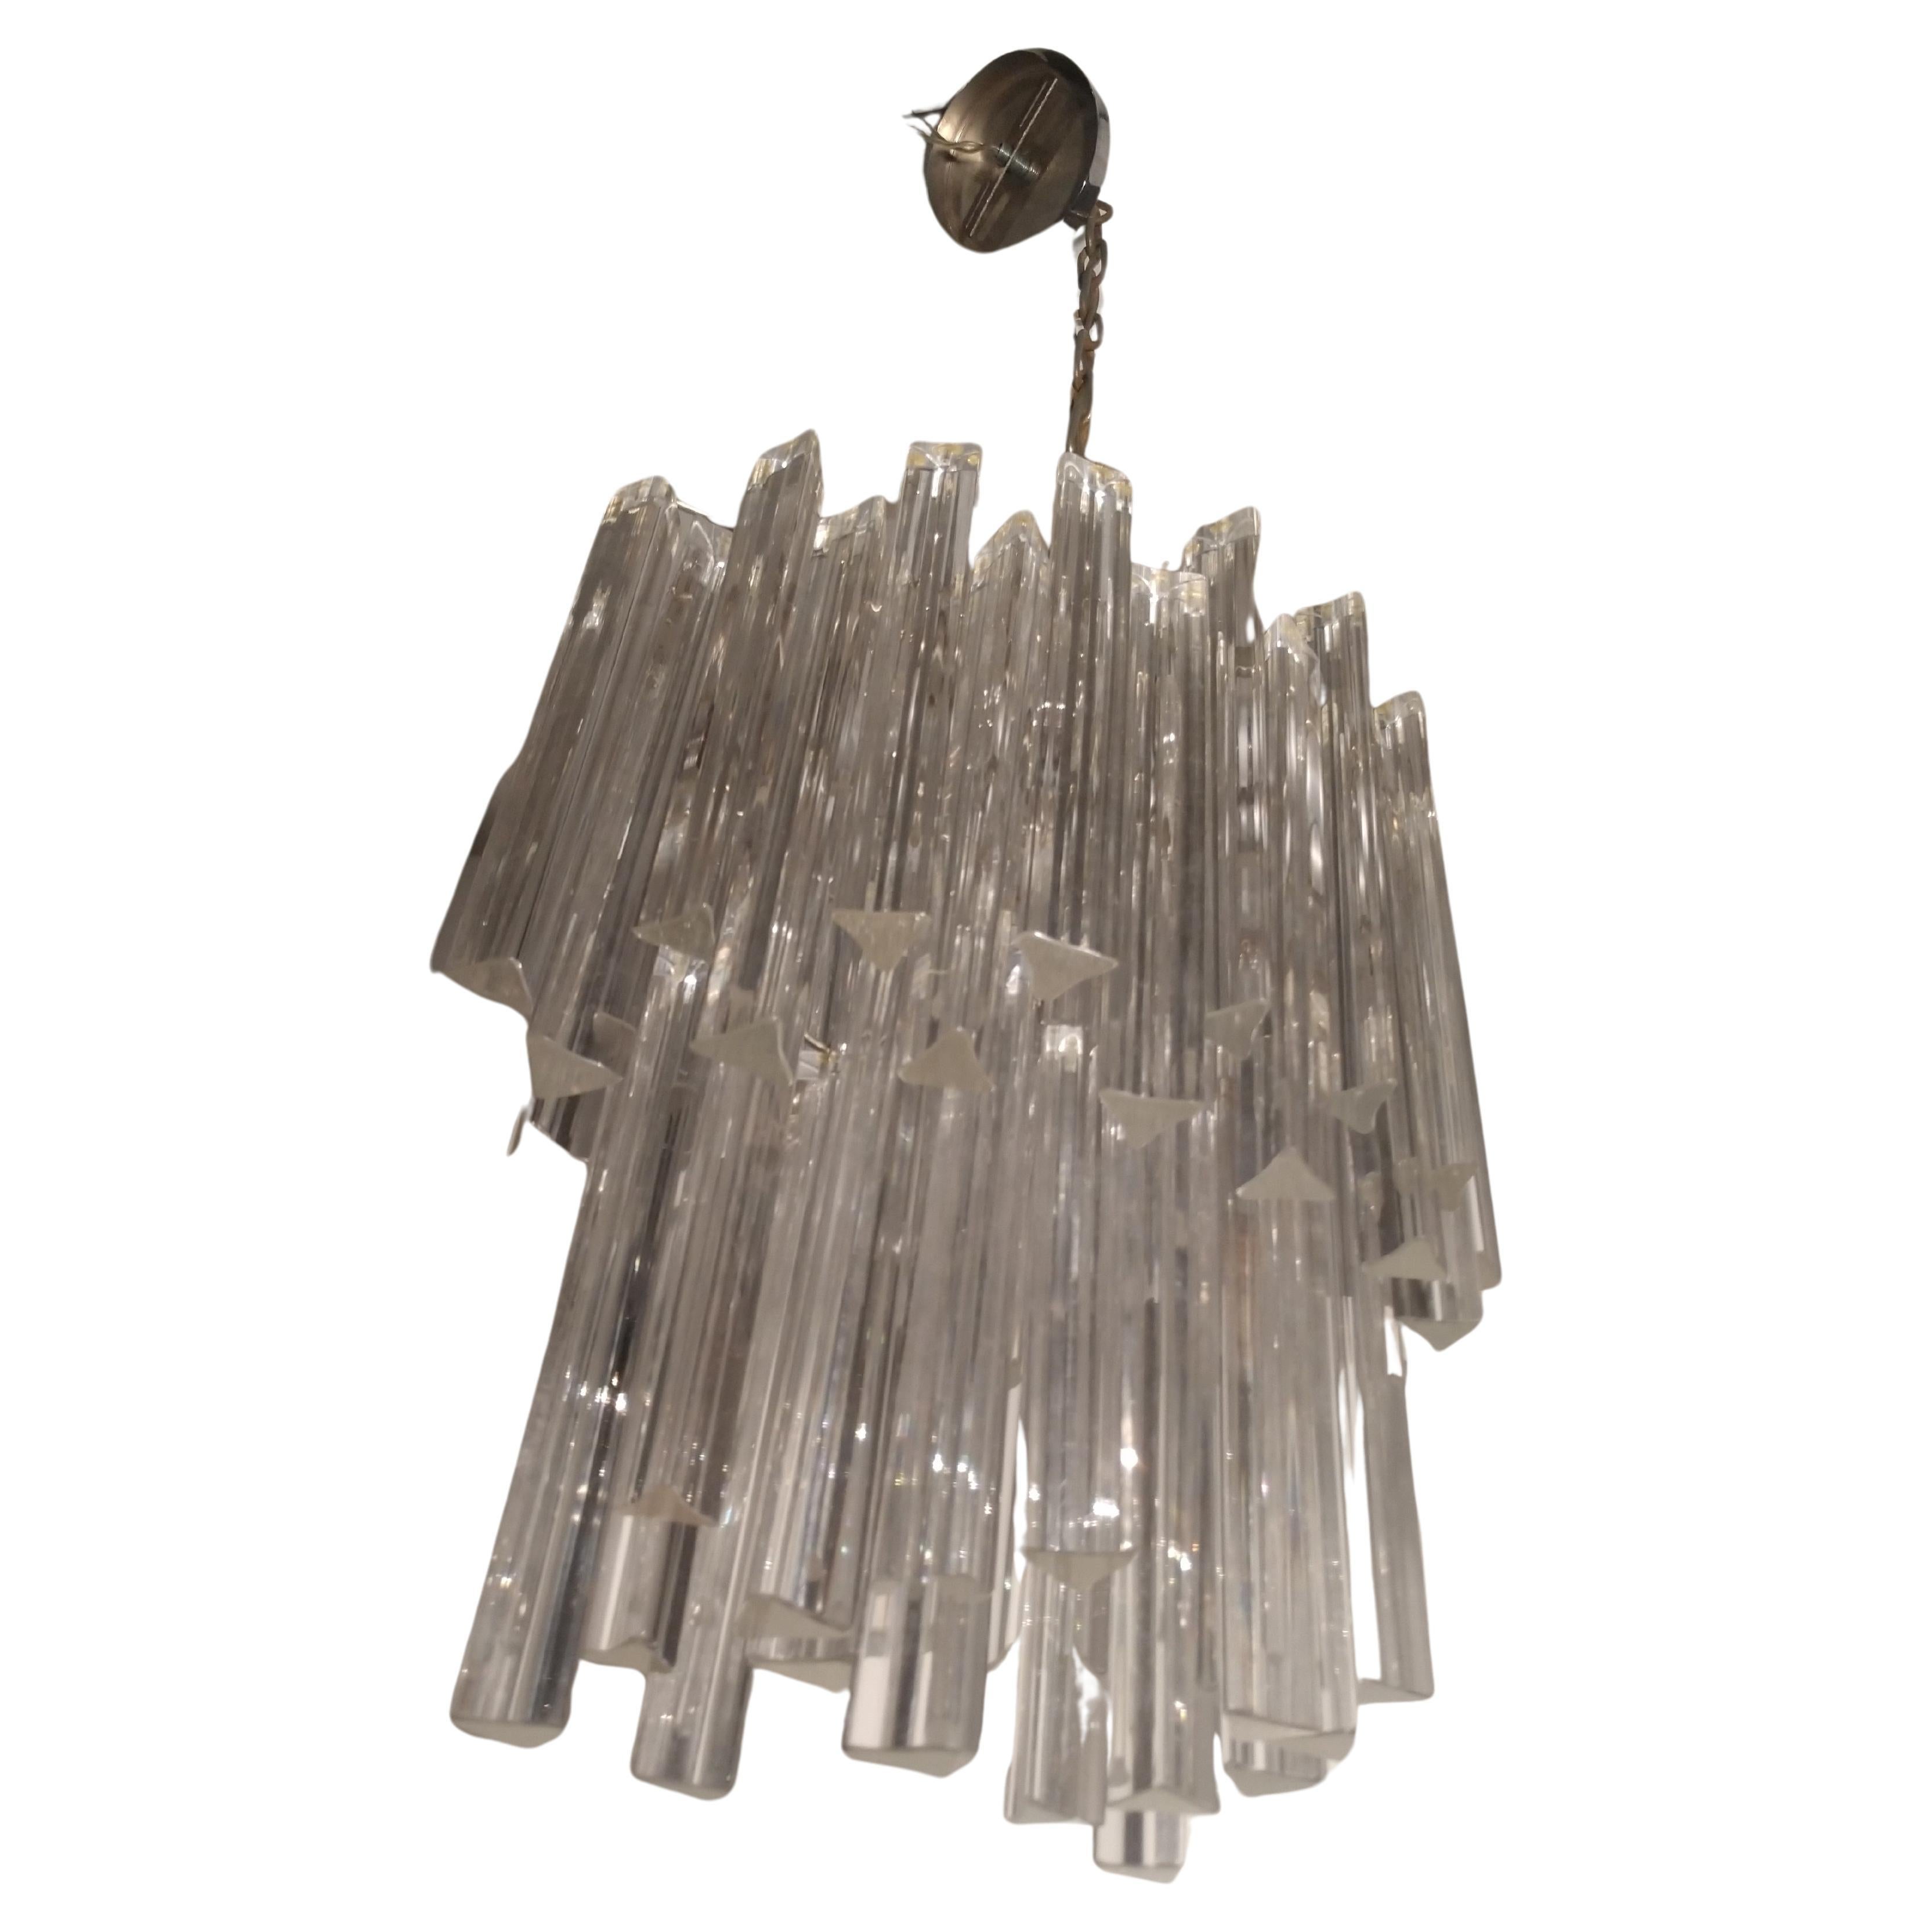 Mid Century Modern Venini Murano Glass Prism Chandelier In Good Condition For Sale In Port Jervis, NY